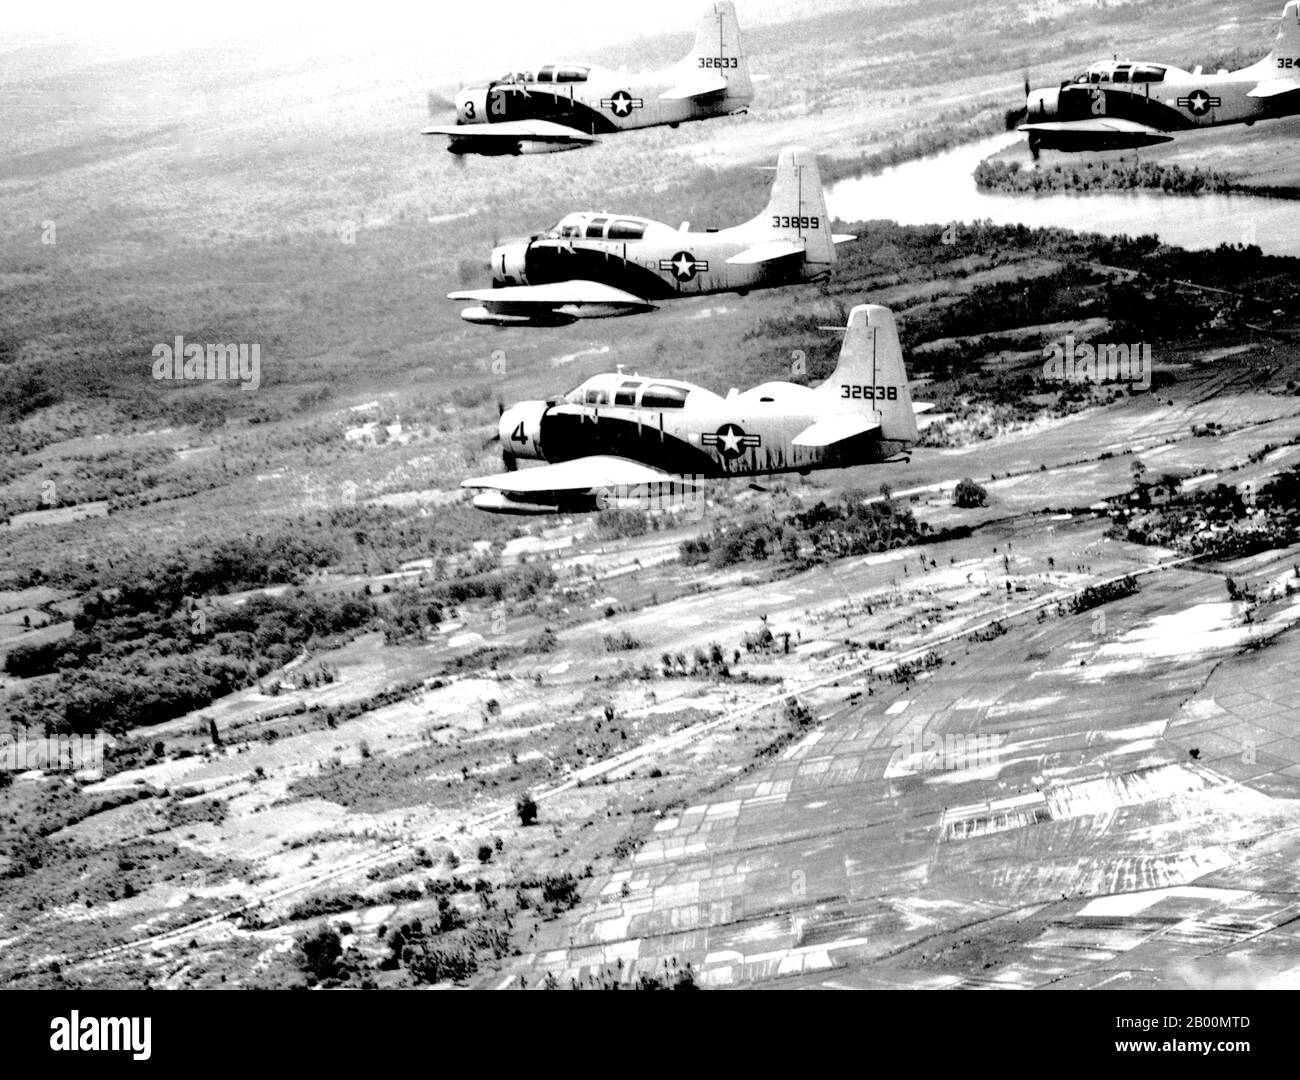 Vietnam: A-1E Skyraider aircraft of the 34th Tactical Group, based at Bien Hoa, South Vietnam, fly in formation over South Vietnam on way to target on June 25, 1965.  The Second Indochina War, known in America as the Vietnam War, was a Cold War era military conflict that occurred in Vietnam, Laos, and Cambodia from 1 November 1955 to the fall of Saigon on 30 April 1975. This war followed the First Indochina War and was fought between North Vietnam, supported by its communist allies, and the government of South Vietnam, supported by the U.S. and other anti-communist nations. Stock Photo